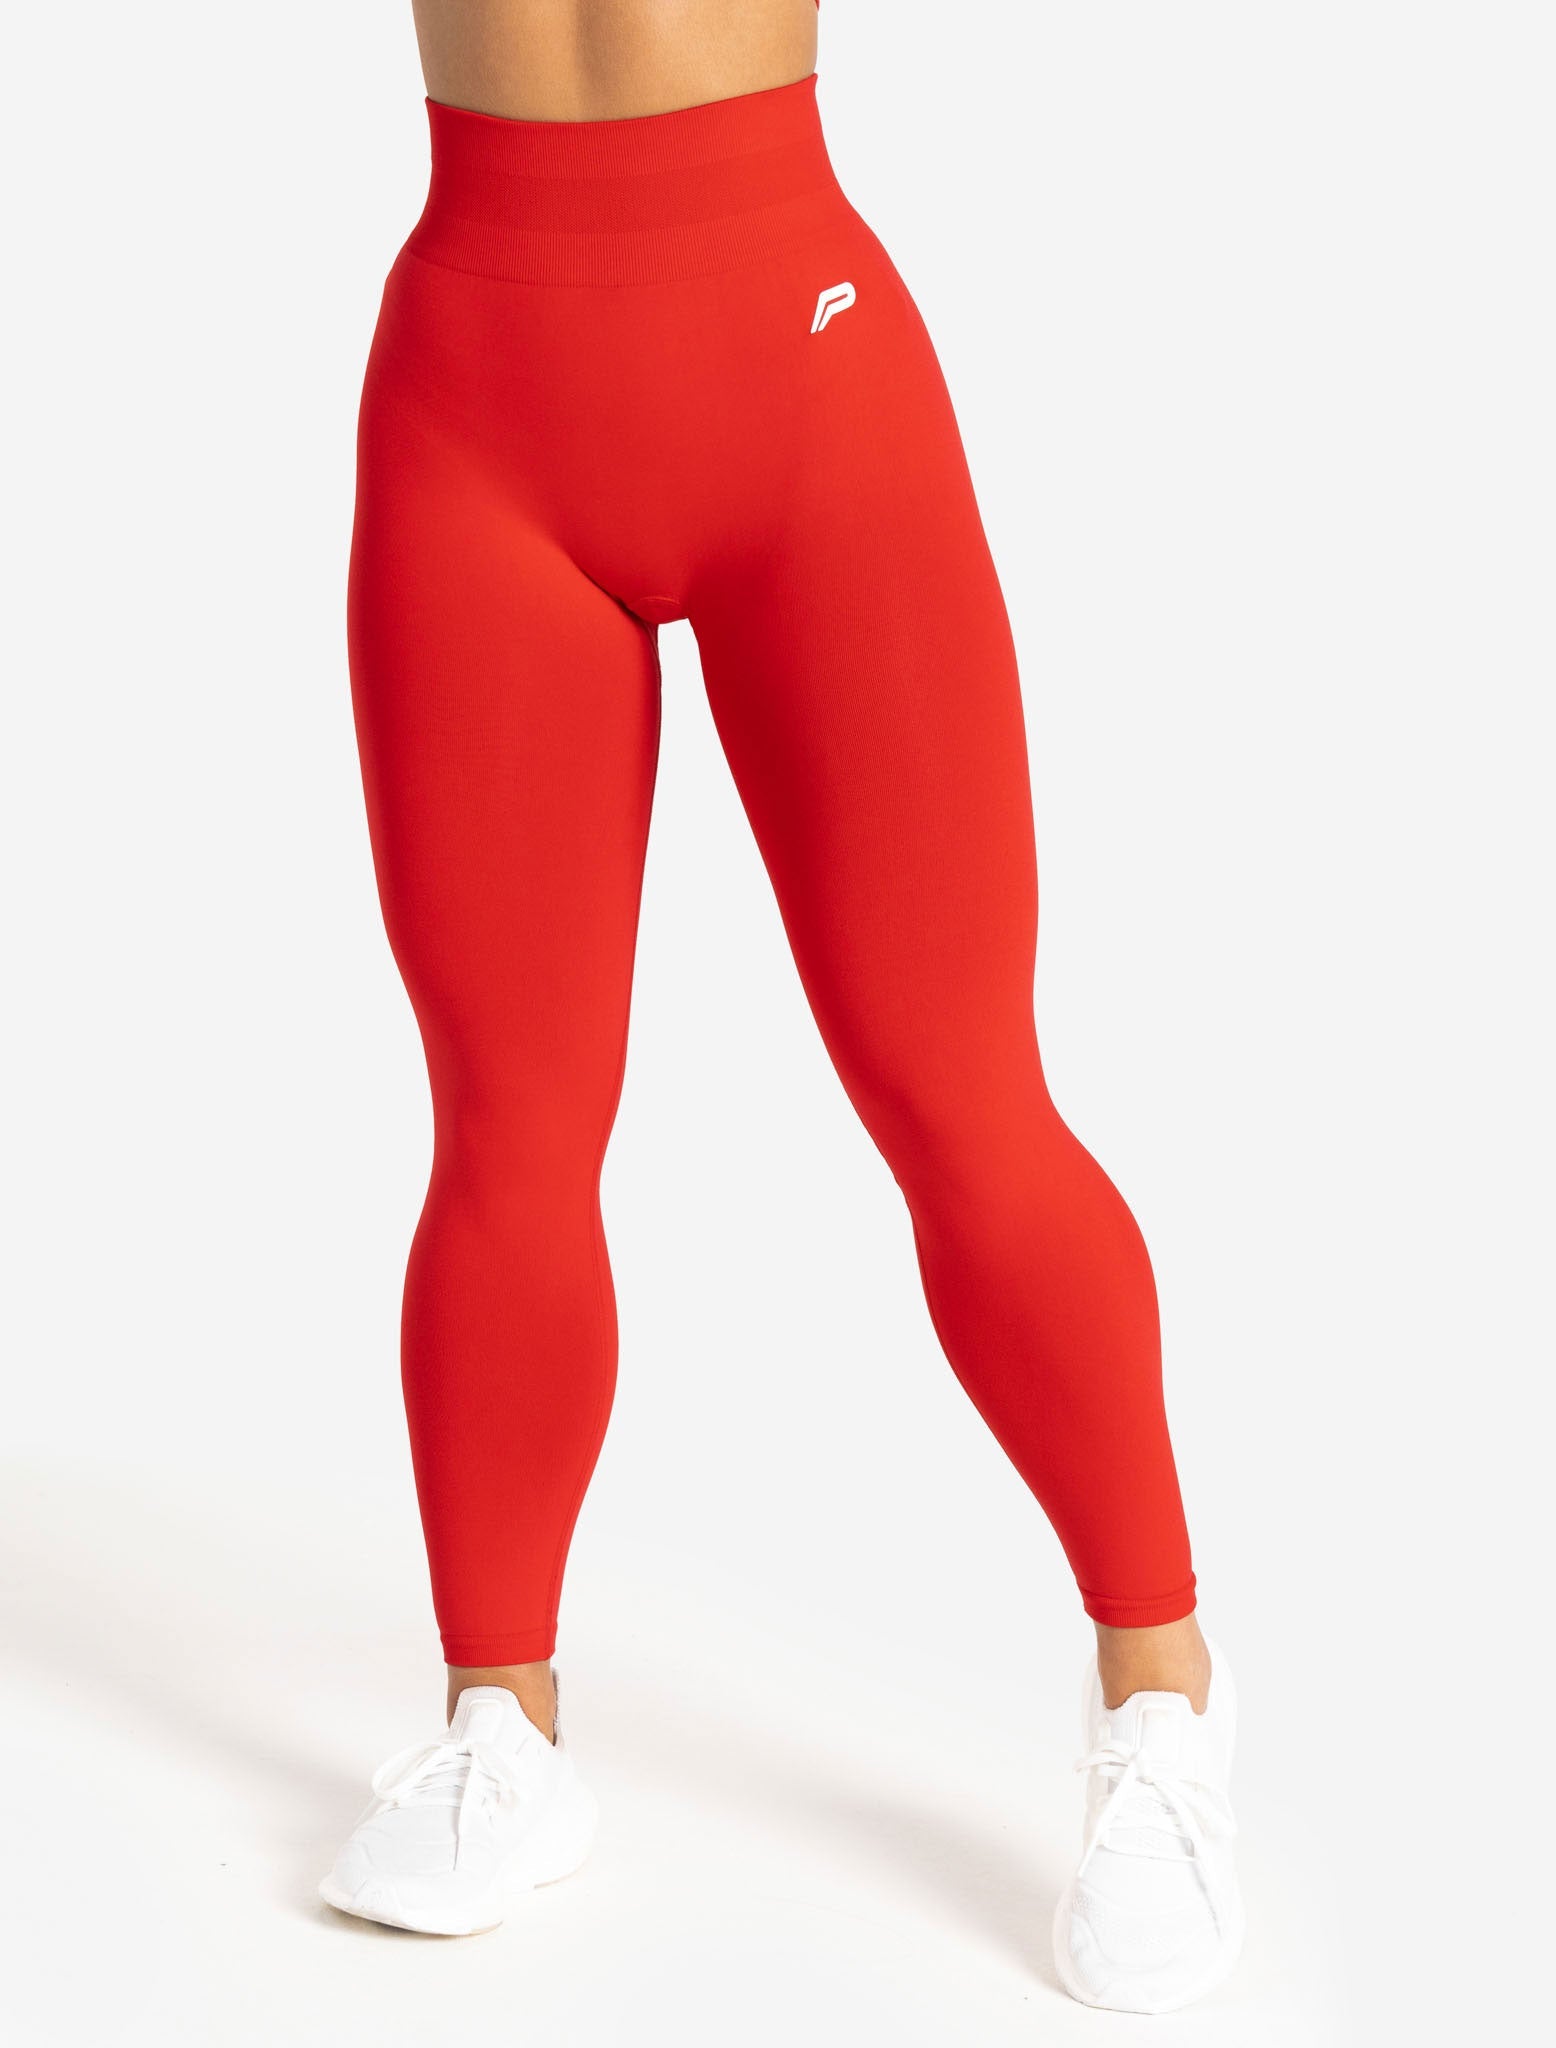 Women Workout Leggings High Waist Push Up Leggings Fashion Ladies Fitness  Red Mesh Patchwork Spandex Legging Pants Plus Size - Red - 4A4134591137  Size S